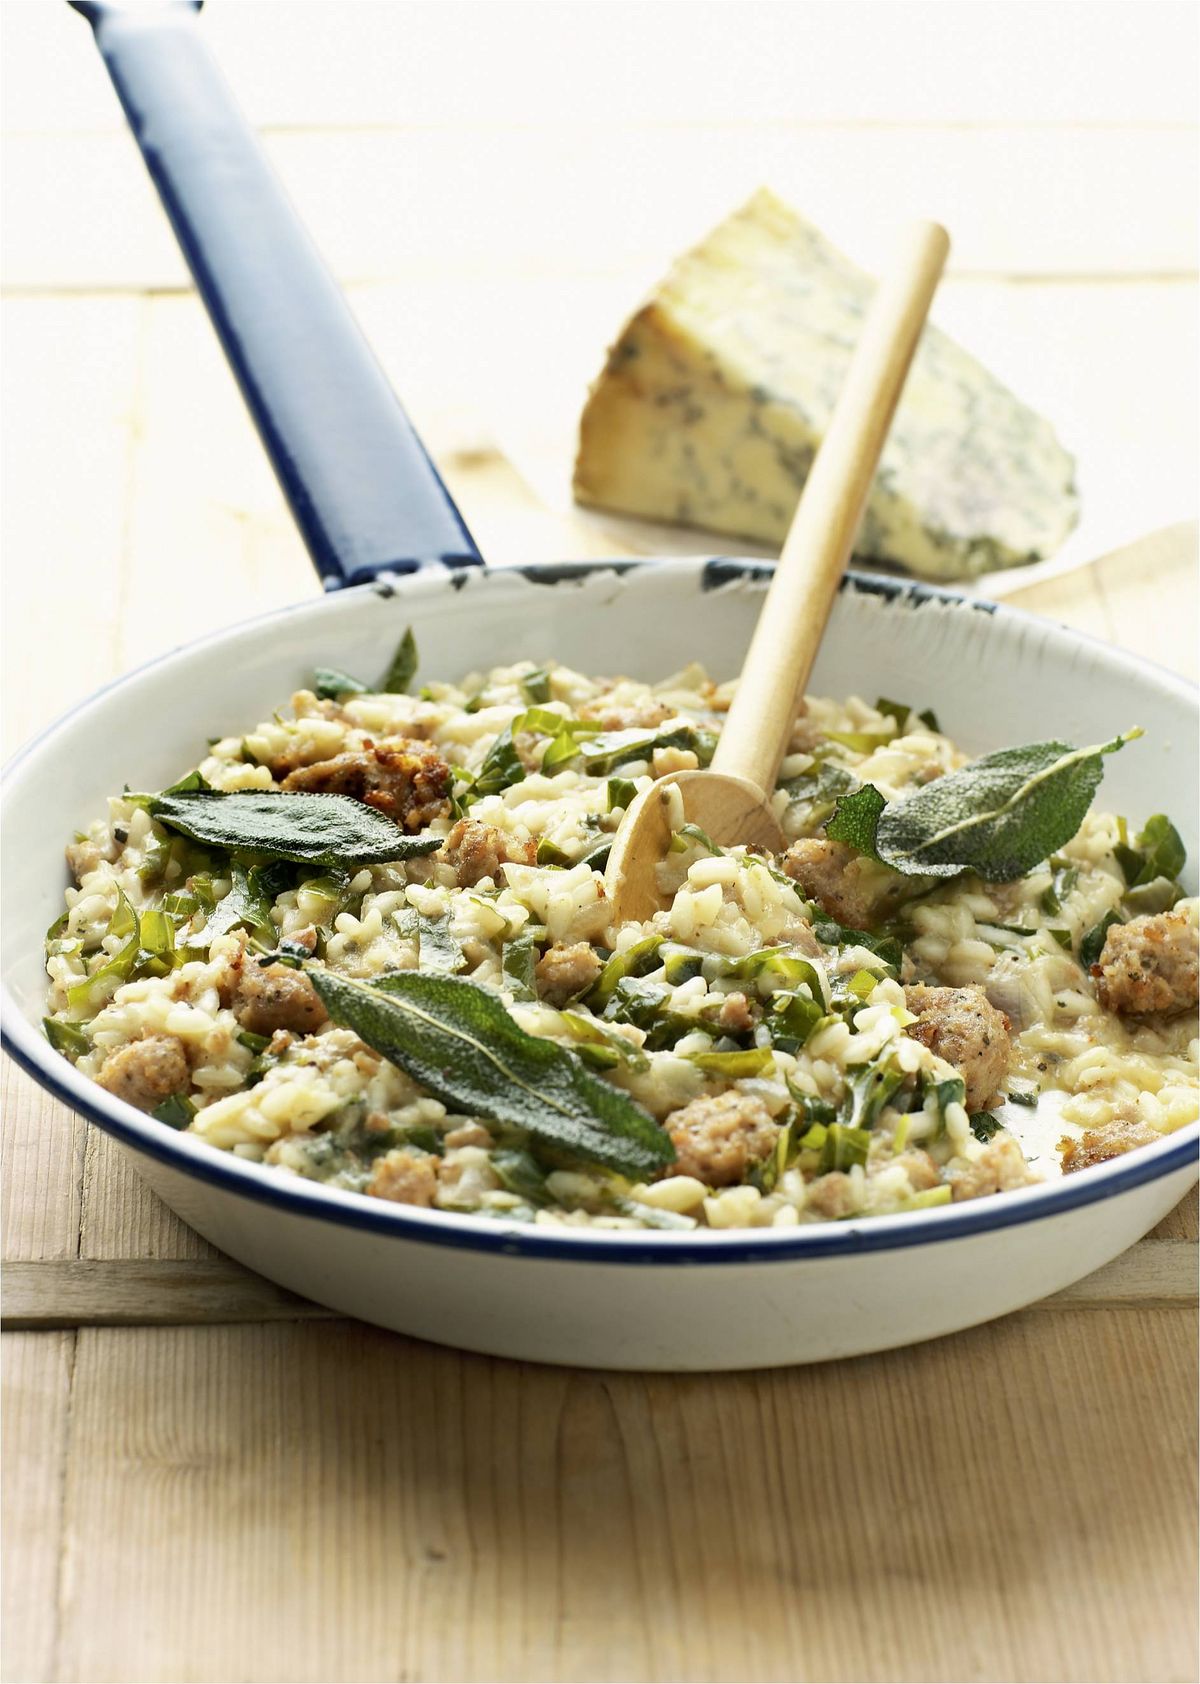 Stilton Risotto with Sausage, Spring Greens and Crispy Sage